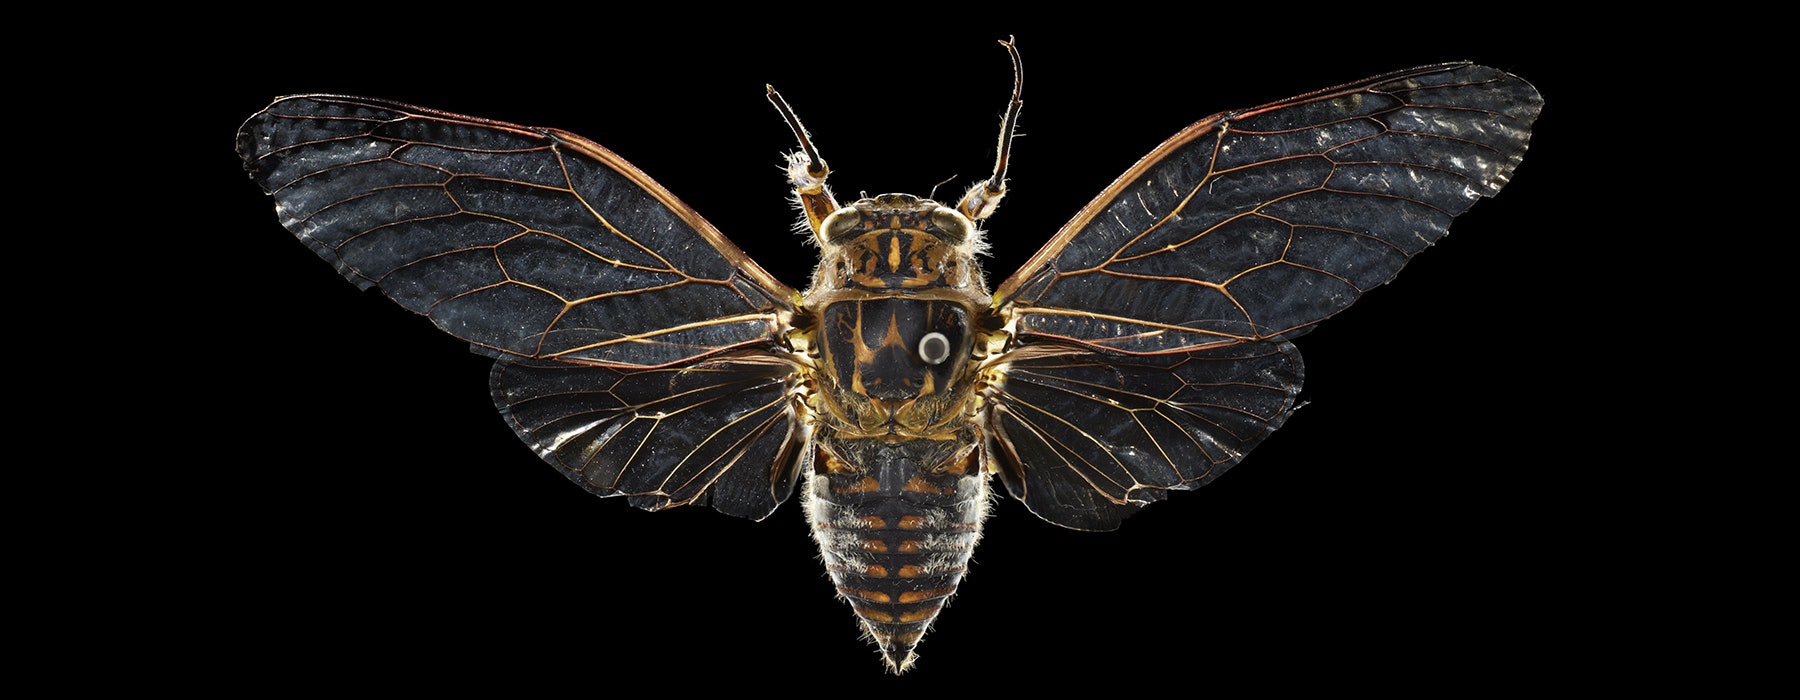 A top-down view of a cicada pinned to a black background.